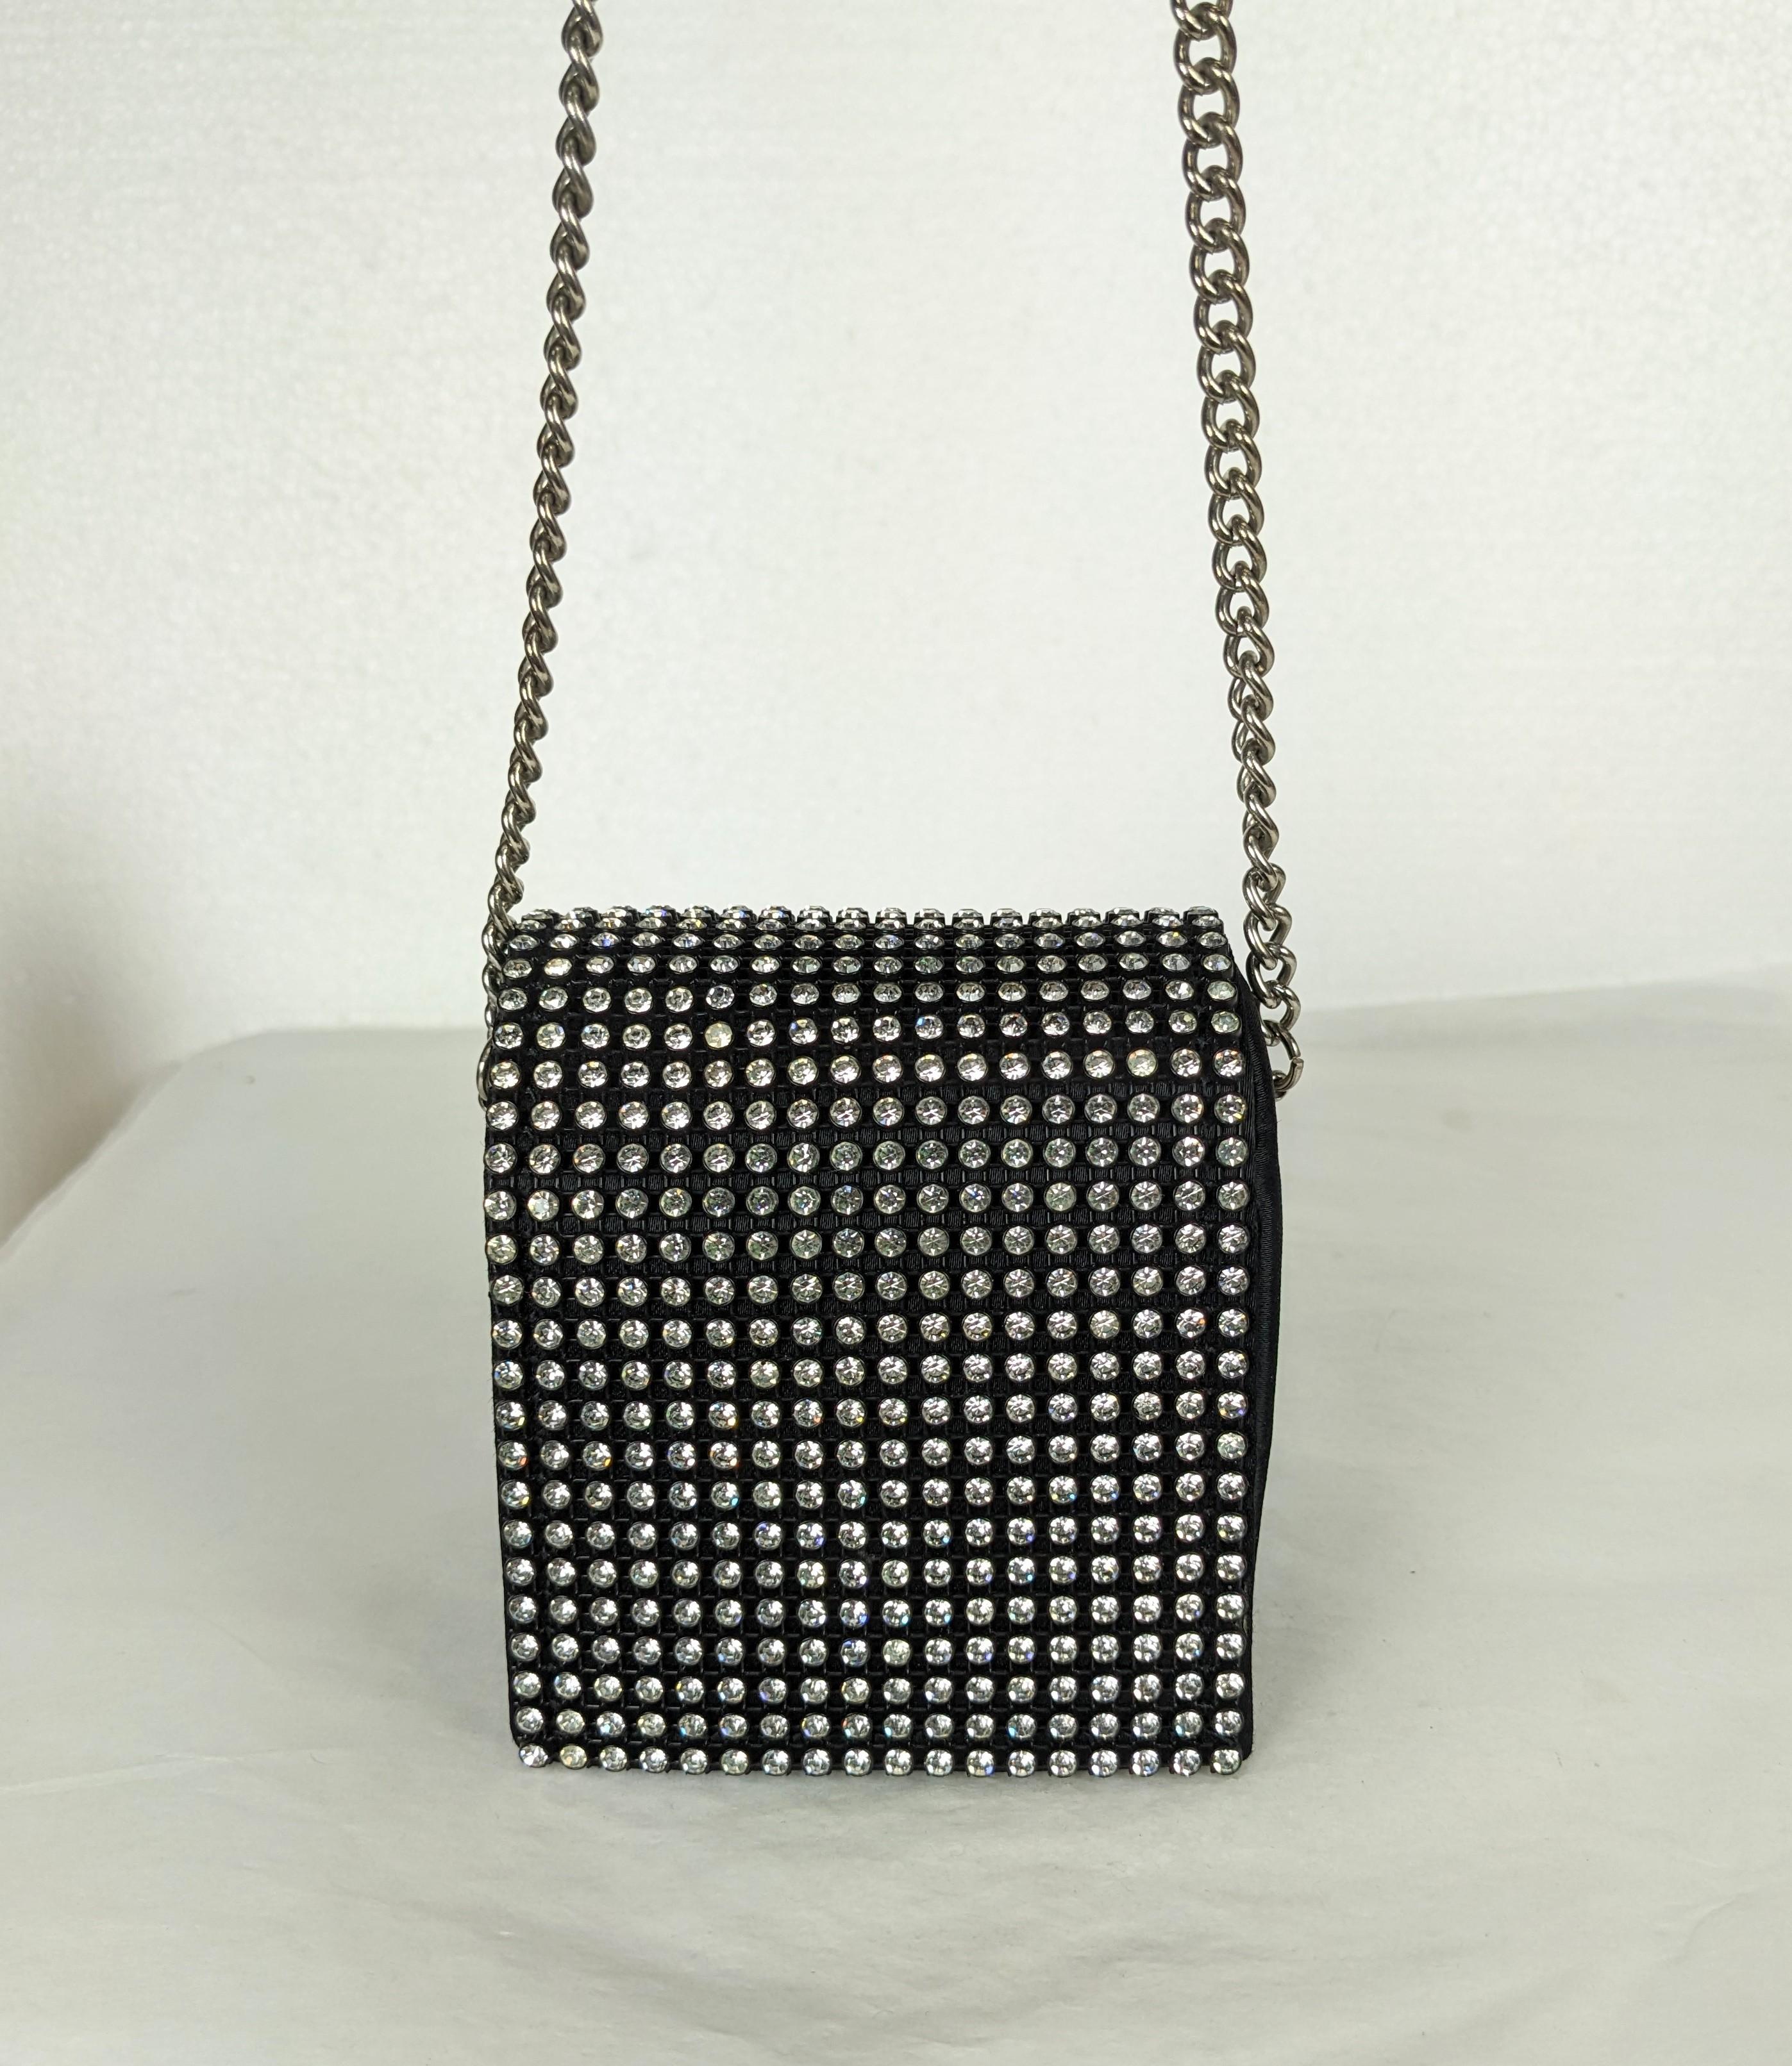 Arnold Scassi Pave Cube Novelty Bag For Sale 1